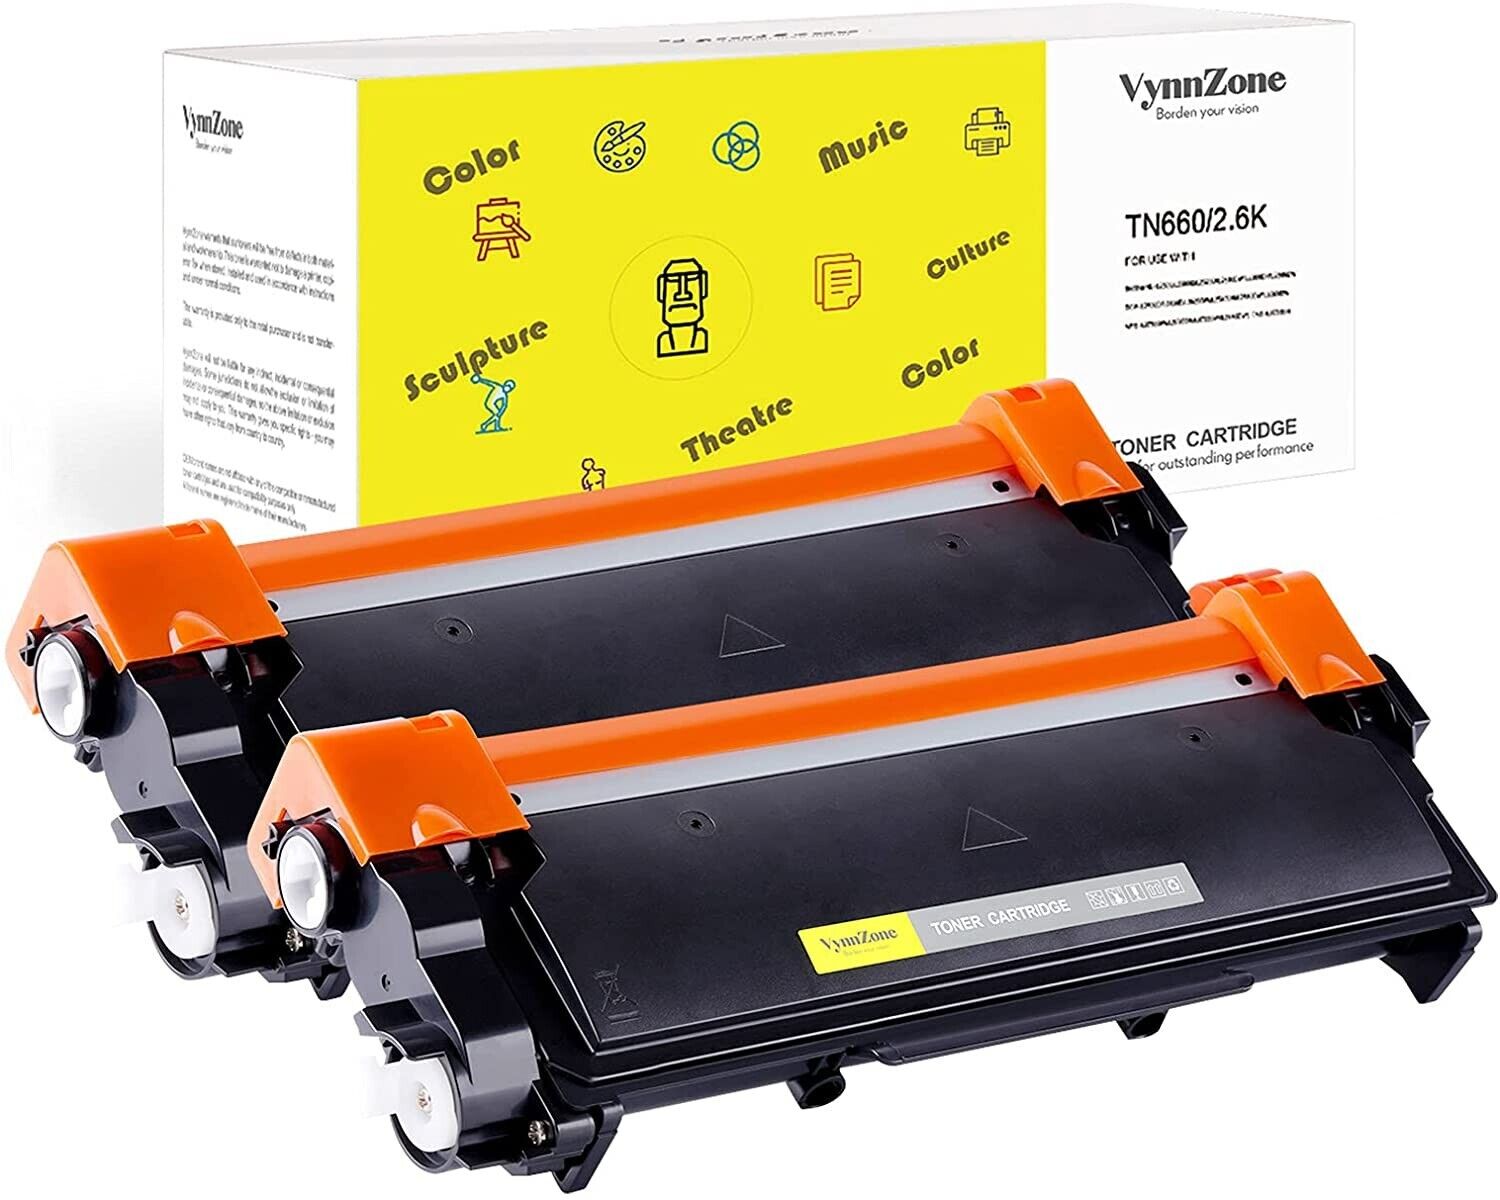 2-pack Brother TN660 High Yield Compatible Toner Cartridge NEW